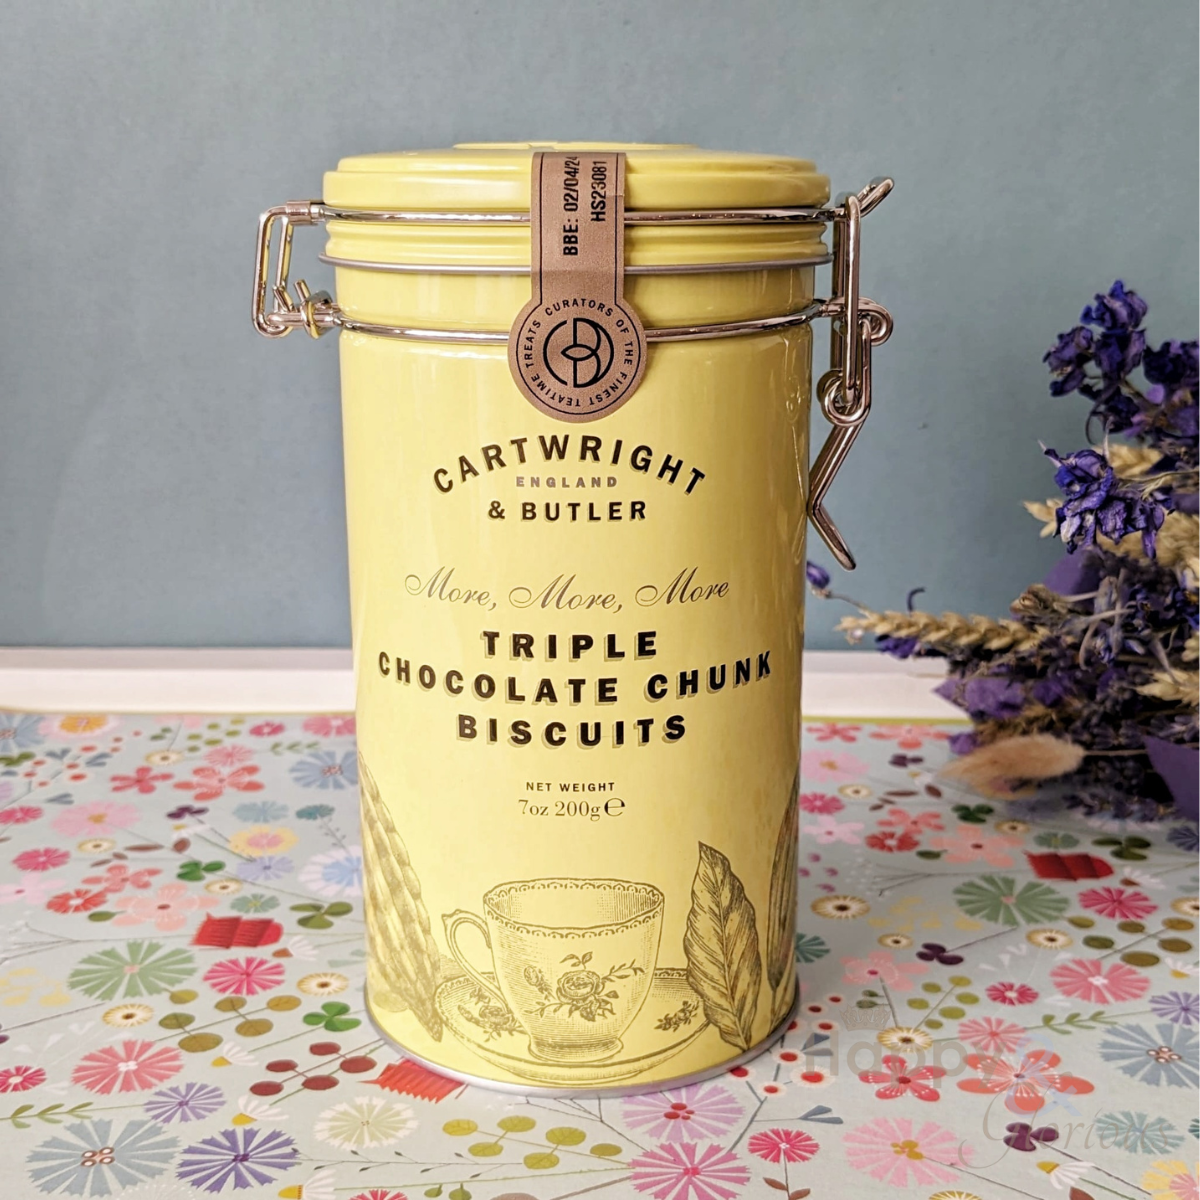 Triple chocolate chunk biscuits in vintage style tin